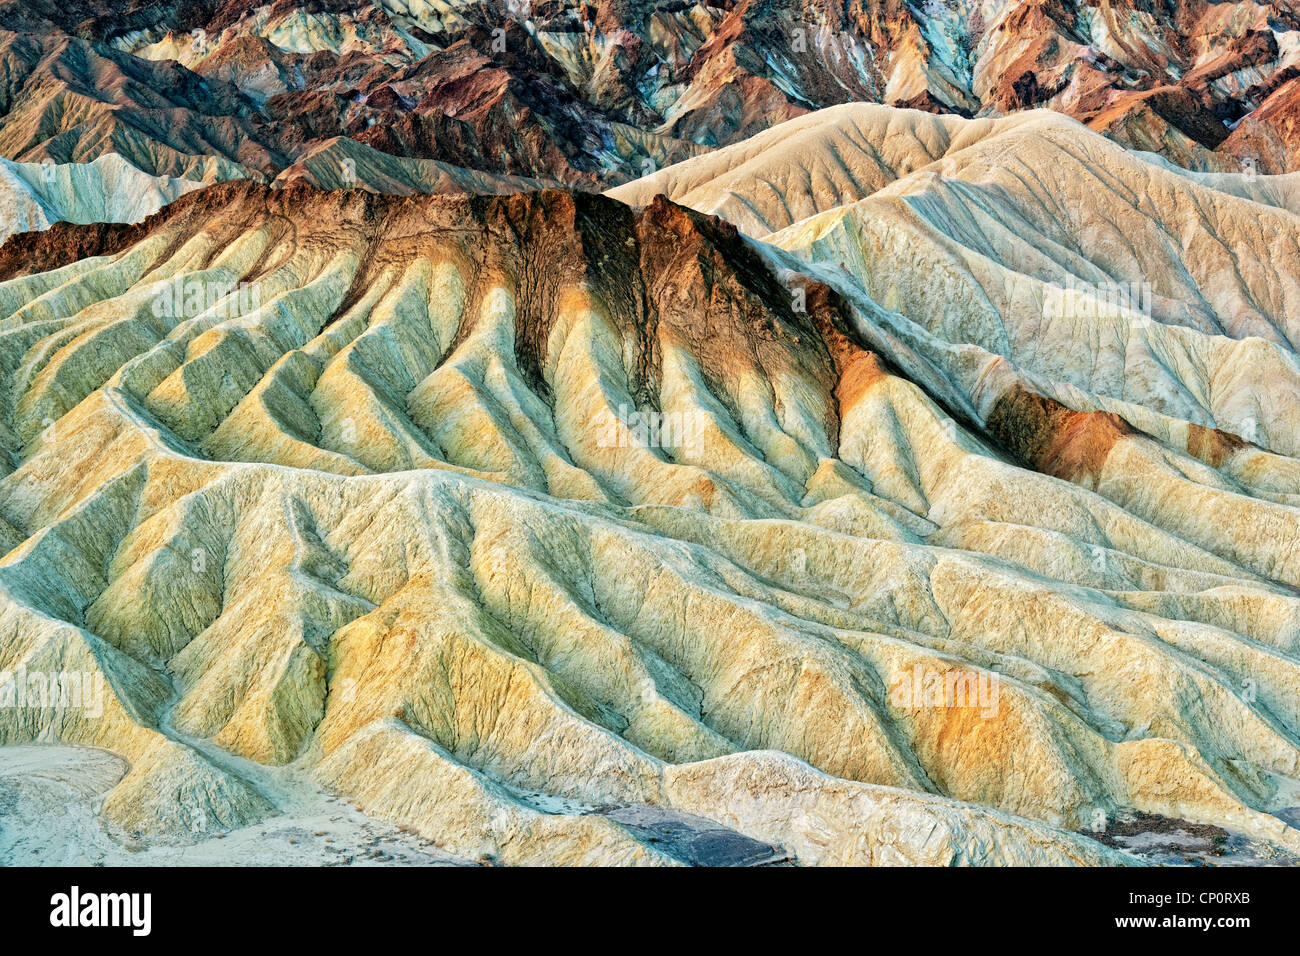 The undulating multicolored badlands of Golden Canyon in California’s Death Valley National Park. Stock Photo